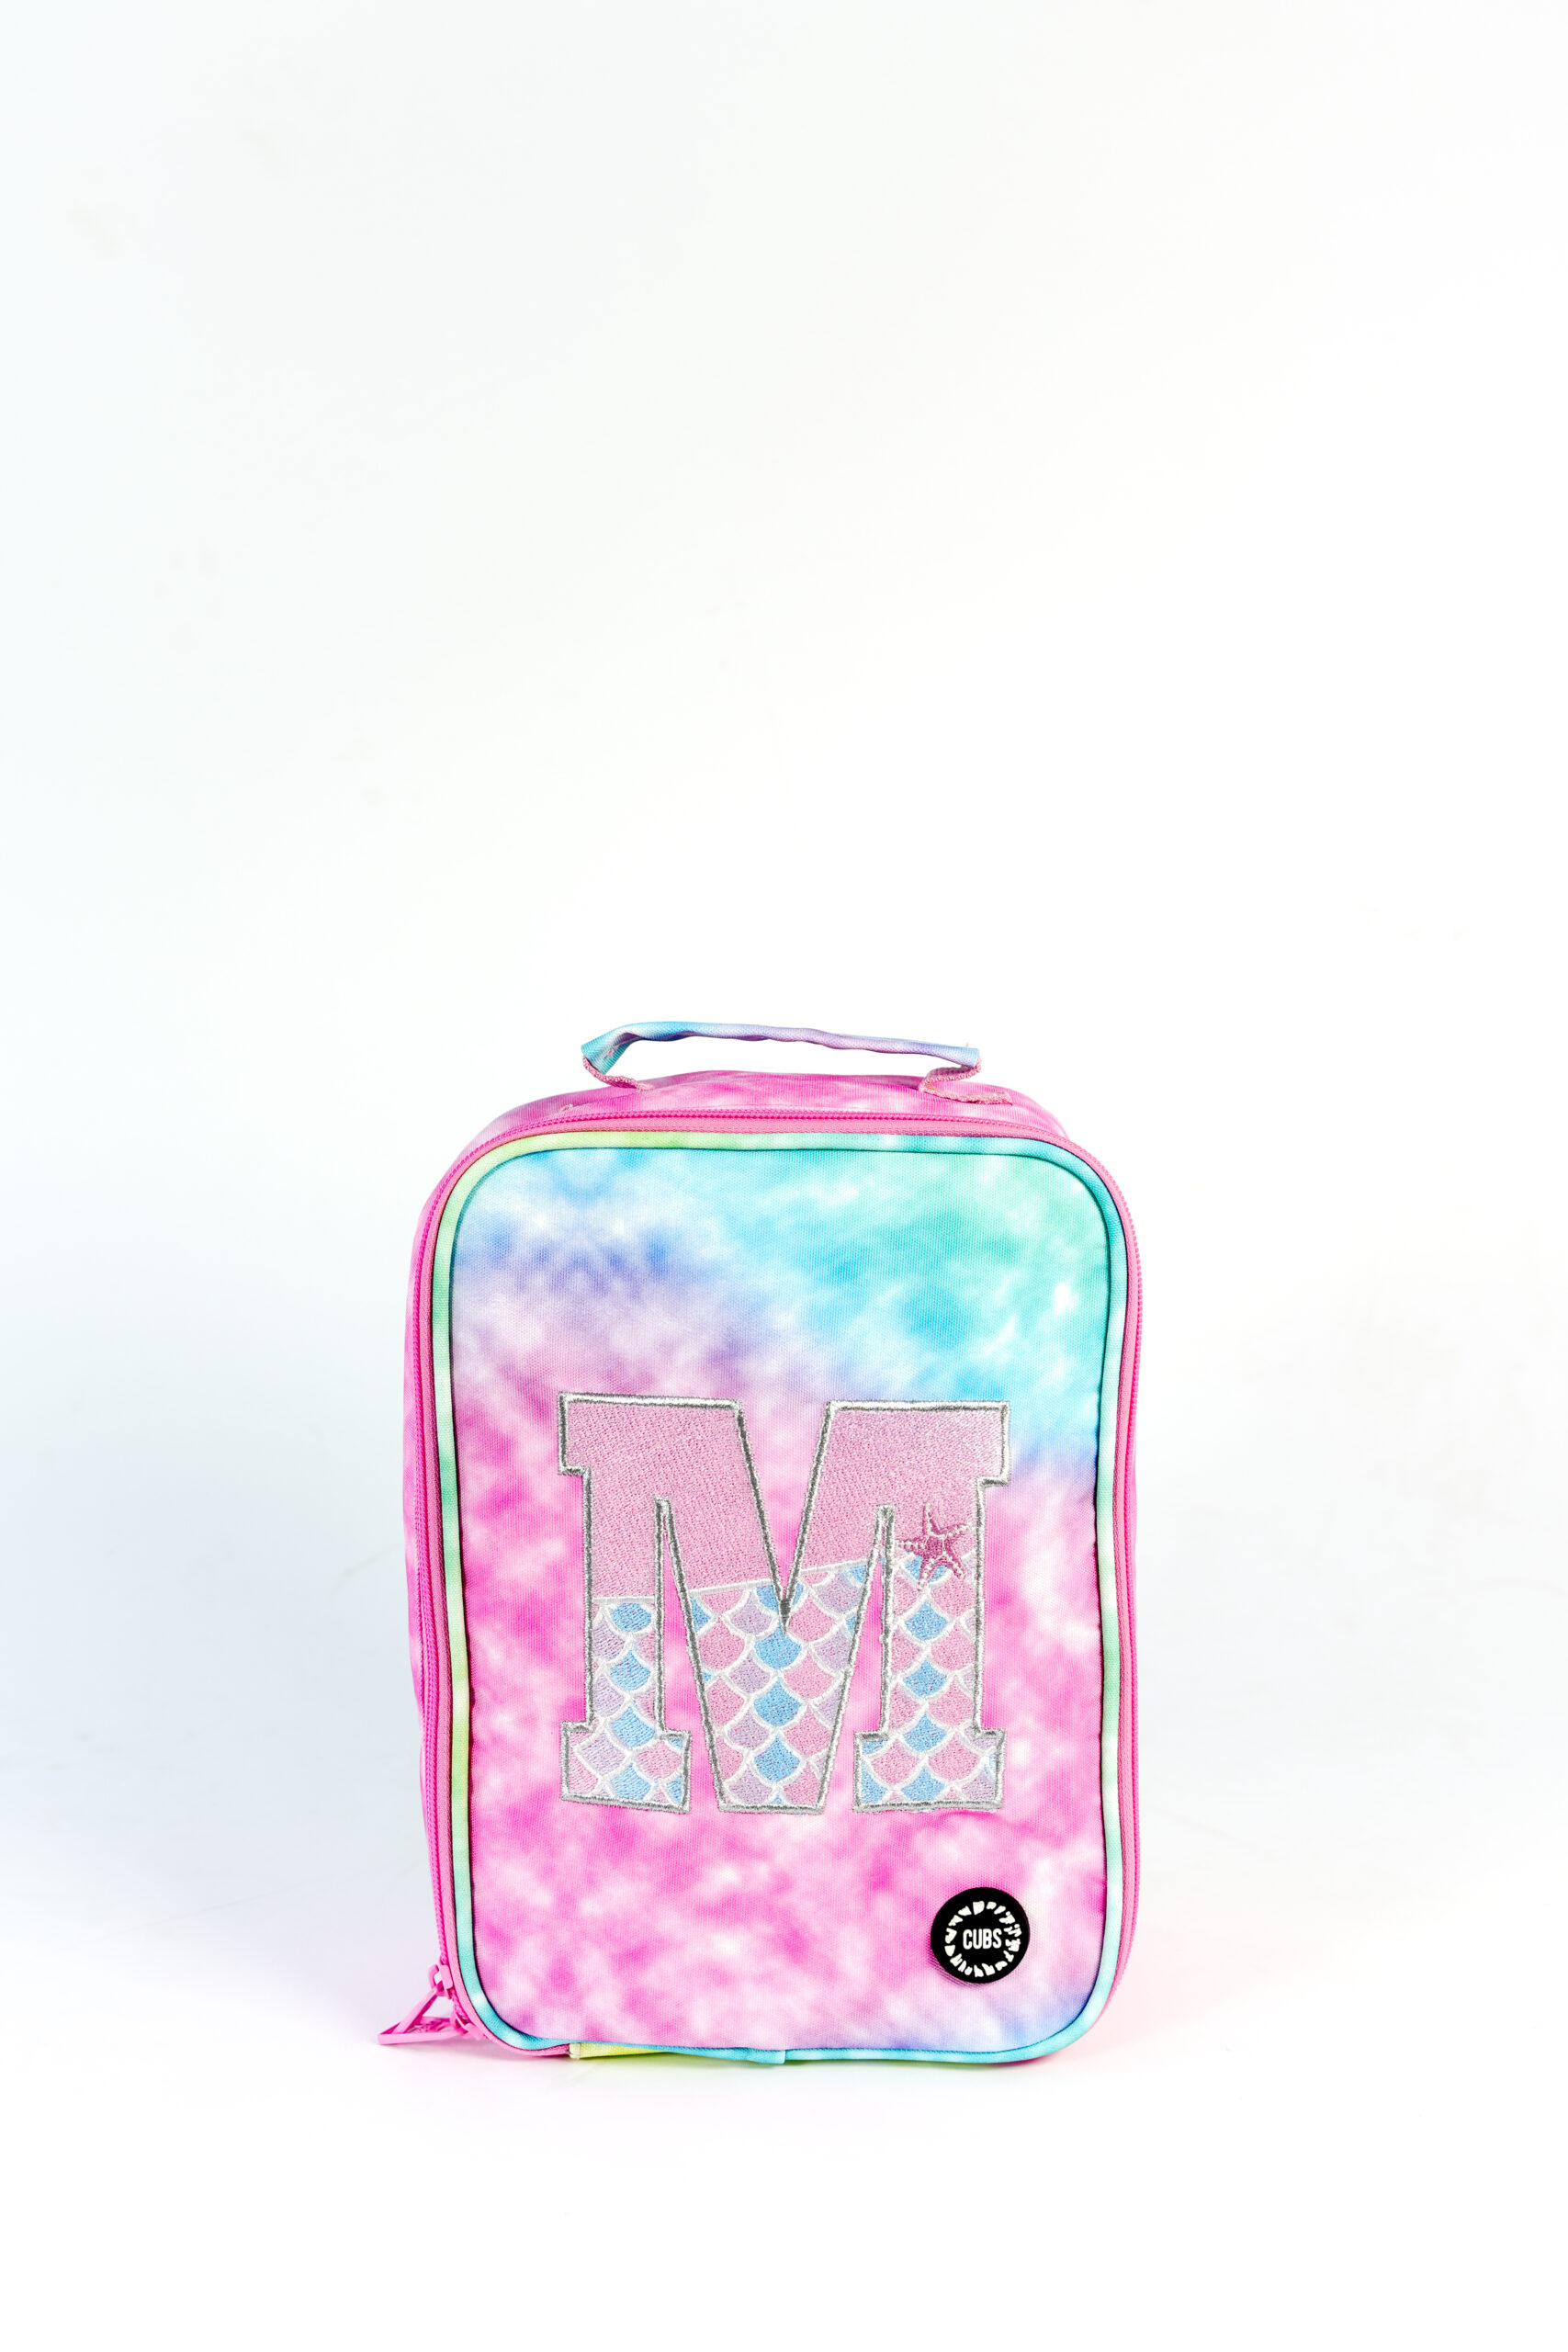 Tie Dye Lunch Box, Pink - Soft-Sided, Insulated, Gives Back to a